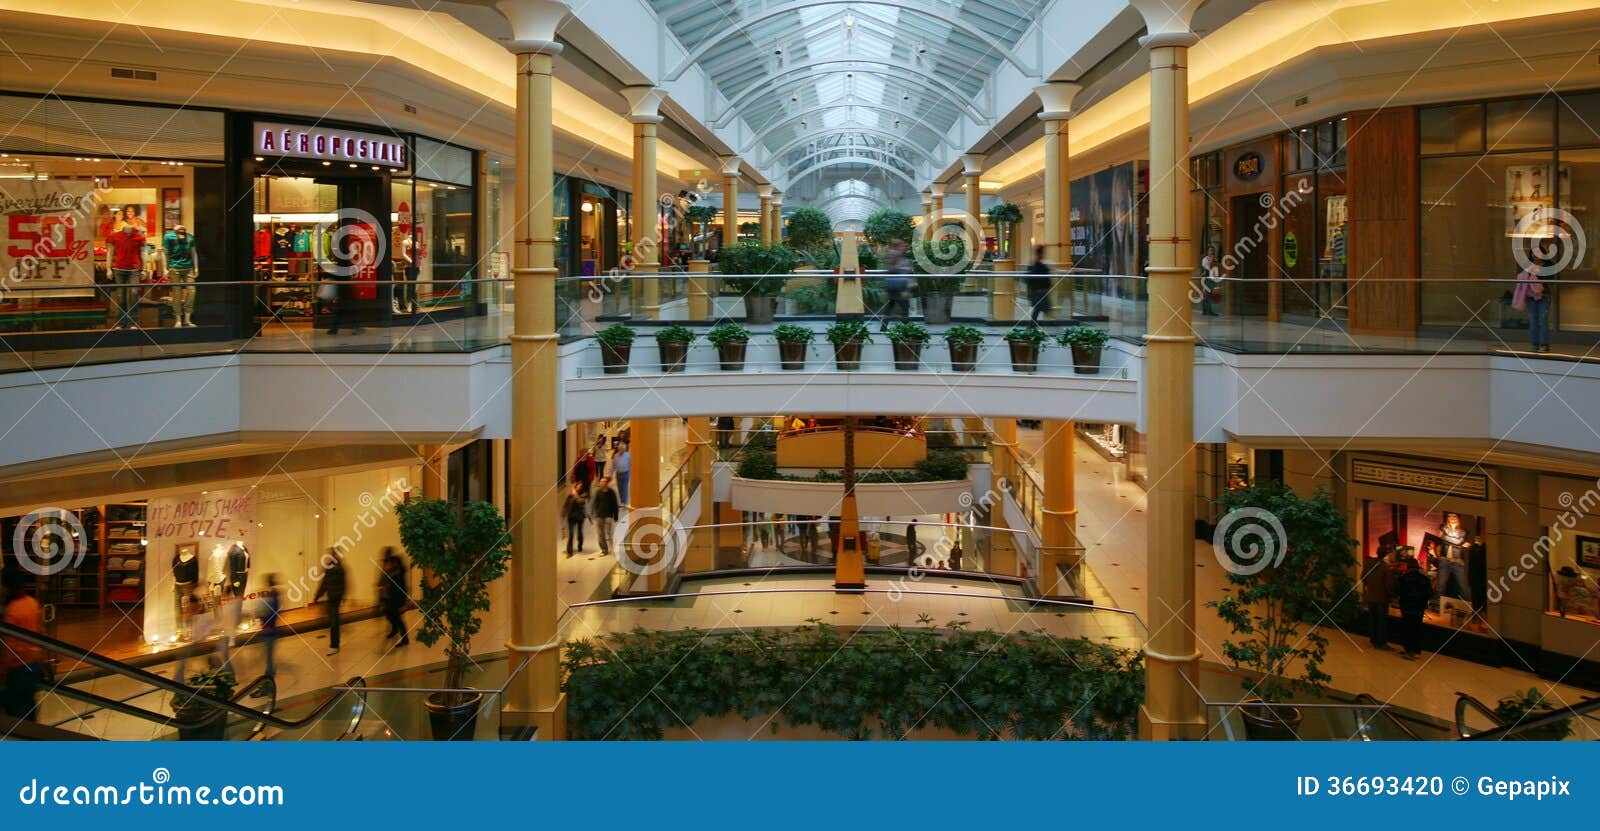 Somerset Collection Mall in Michigan USA Editorial Photography